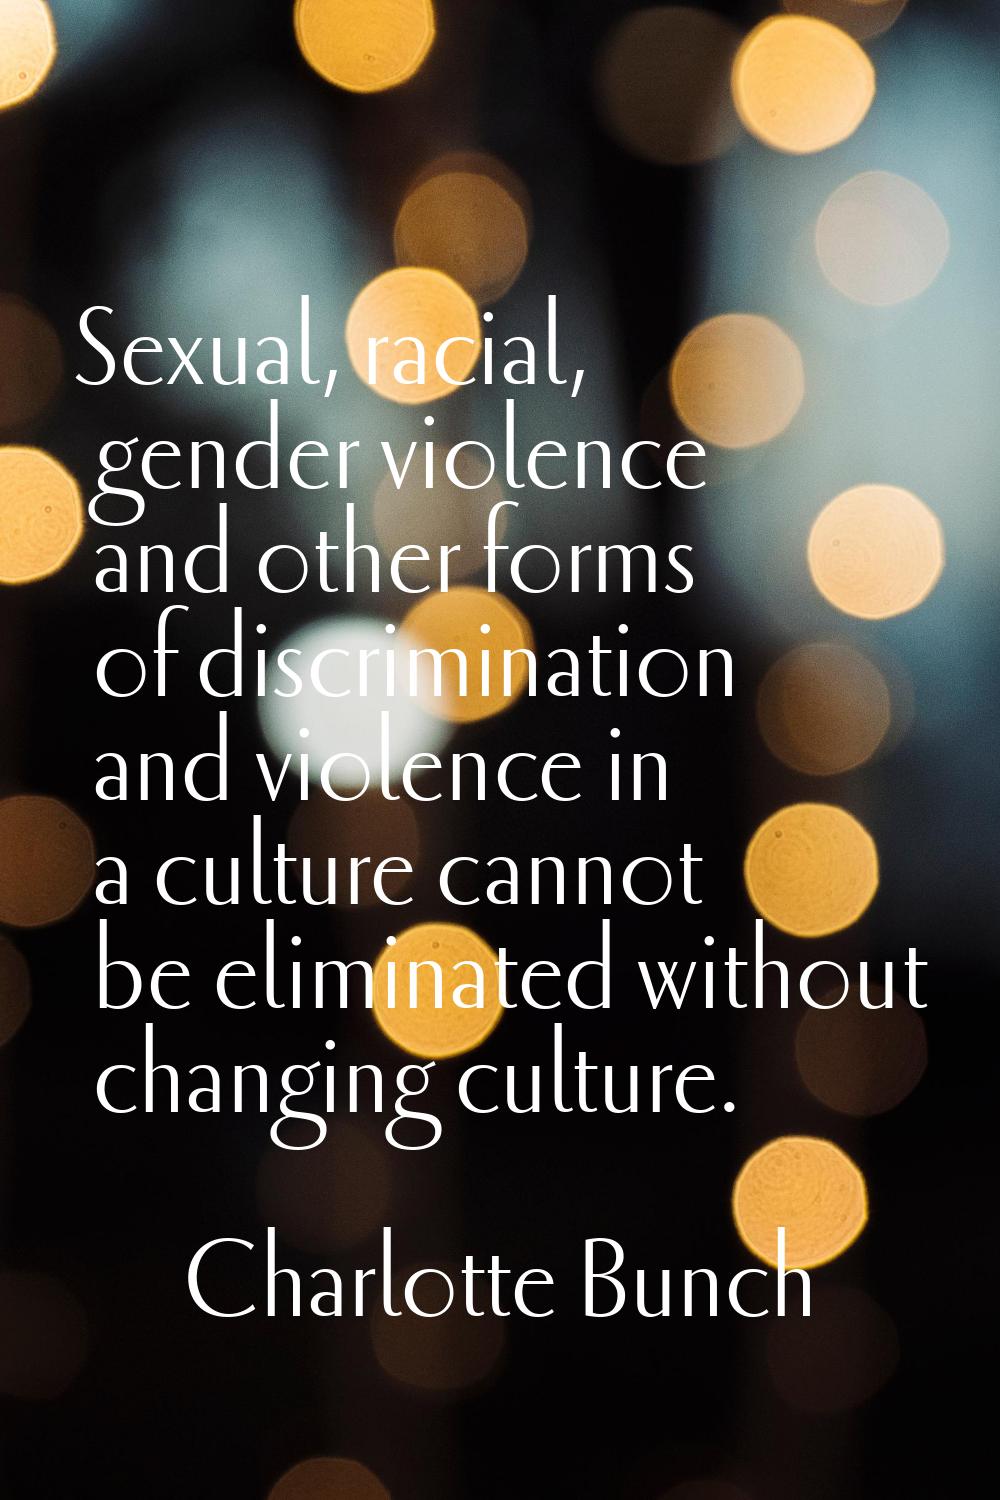 Sexual, racial, gender violence and other forms of discrimination and violence in a culture cannot 